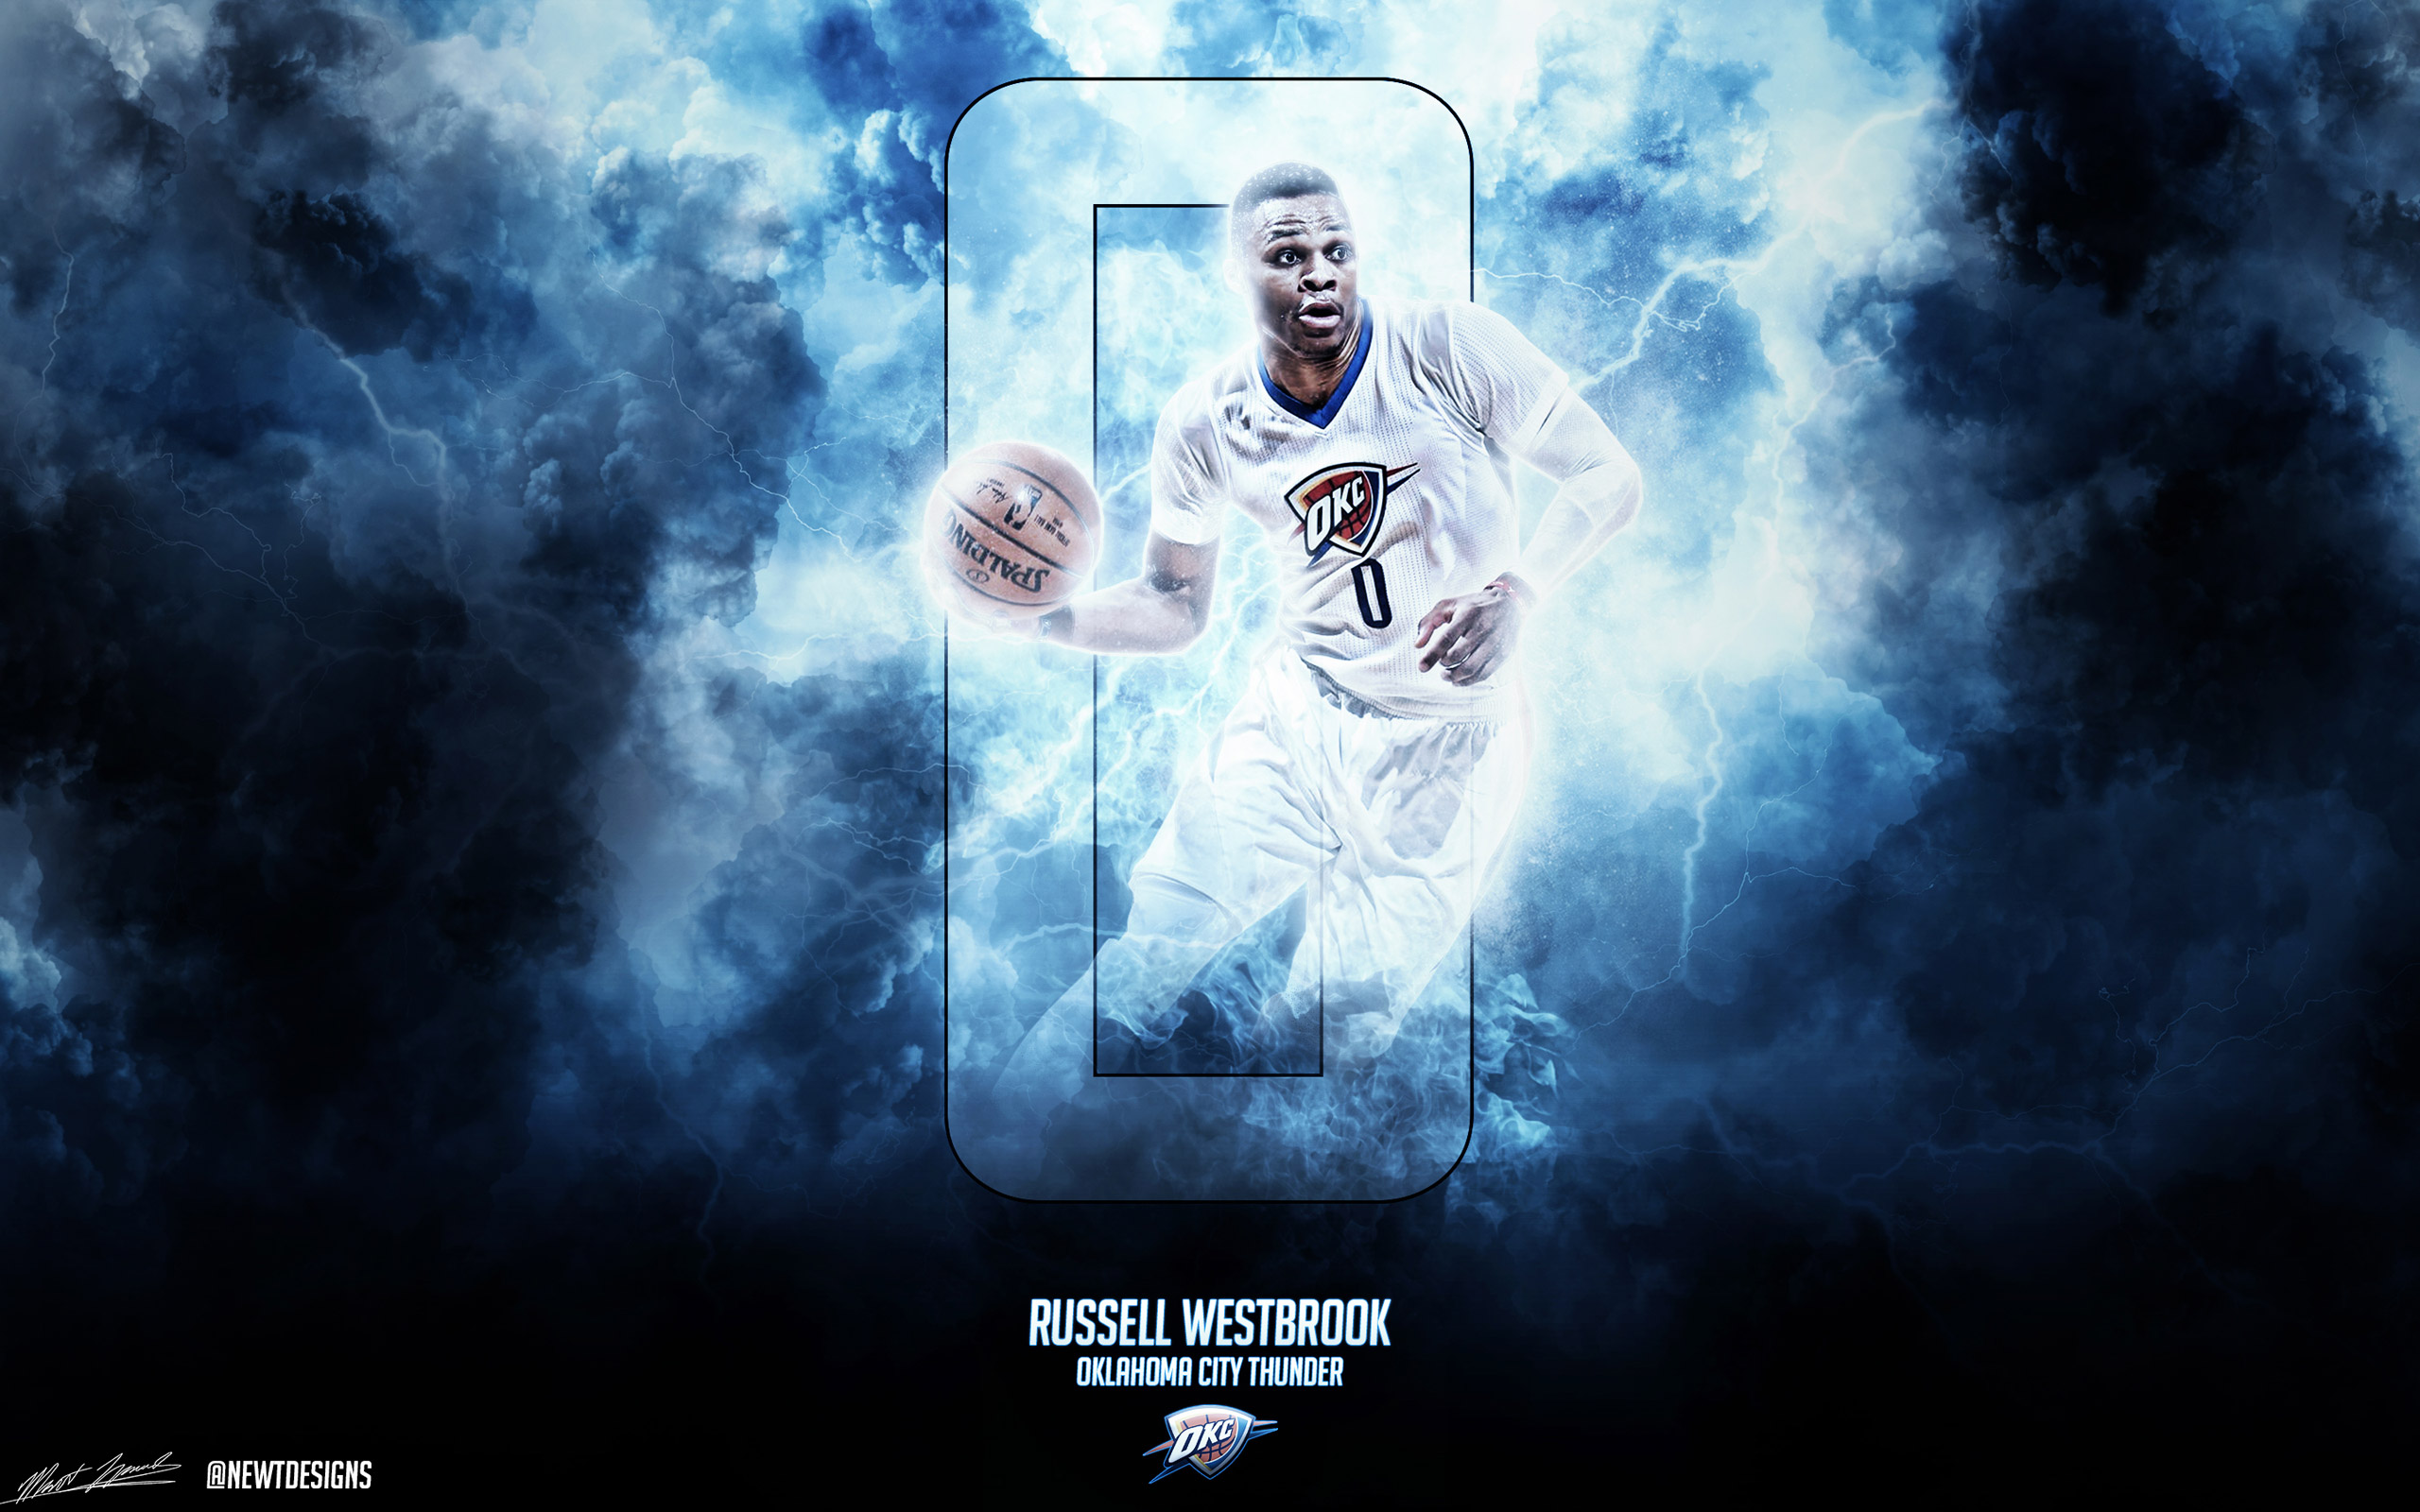 Russell Westbrook 2560×1600 Wallpaper | Basketball Wallpapers at ...